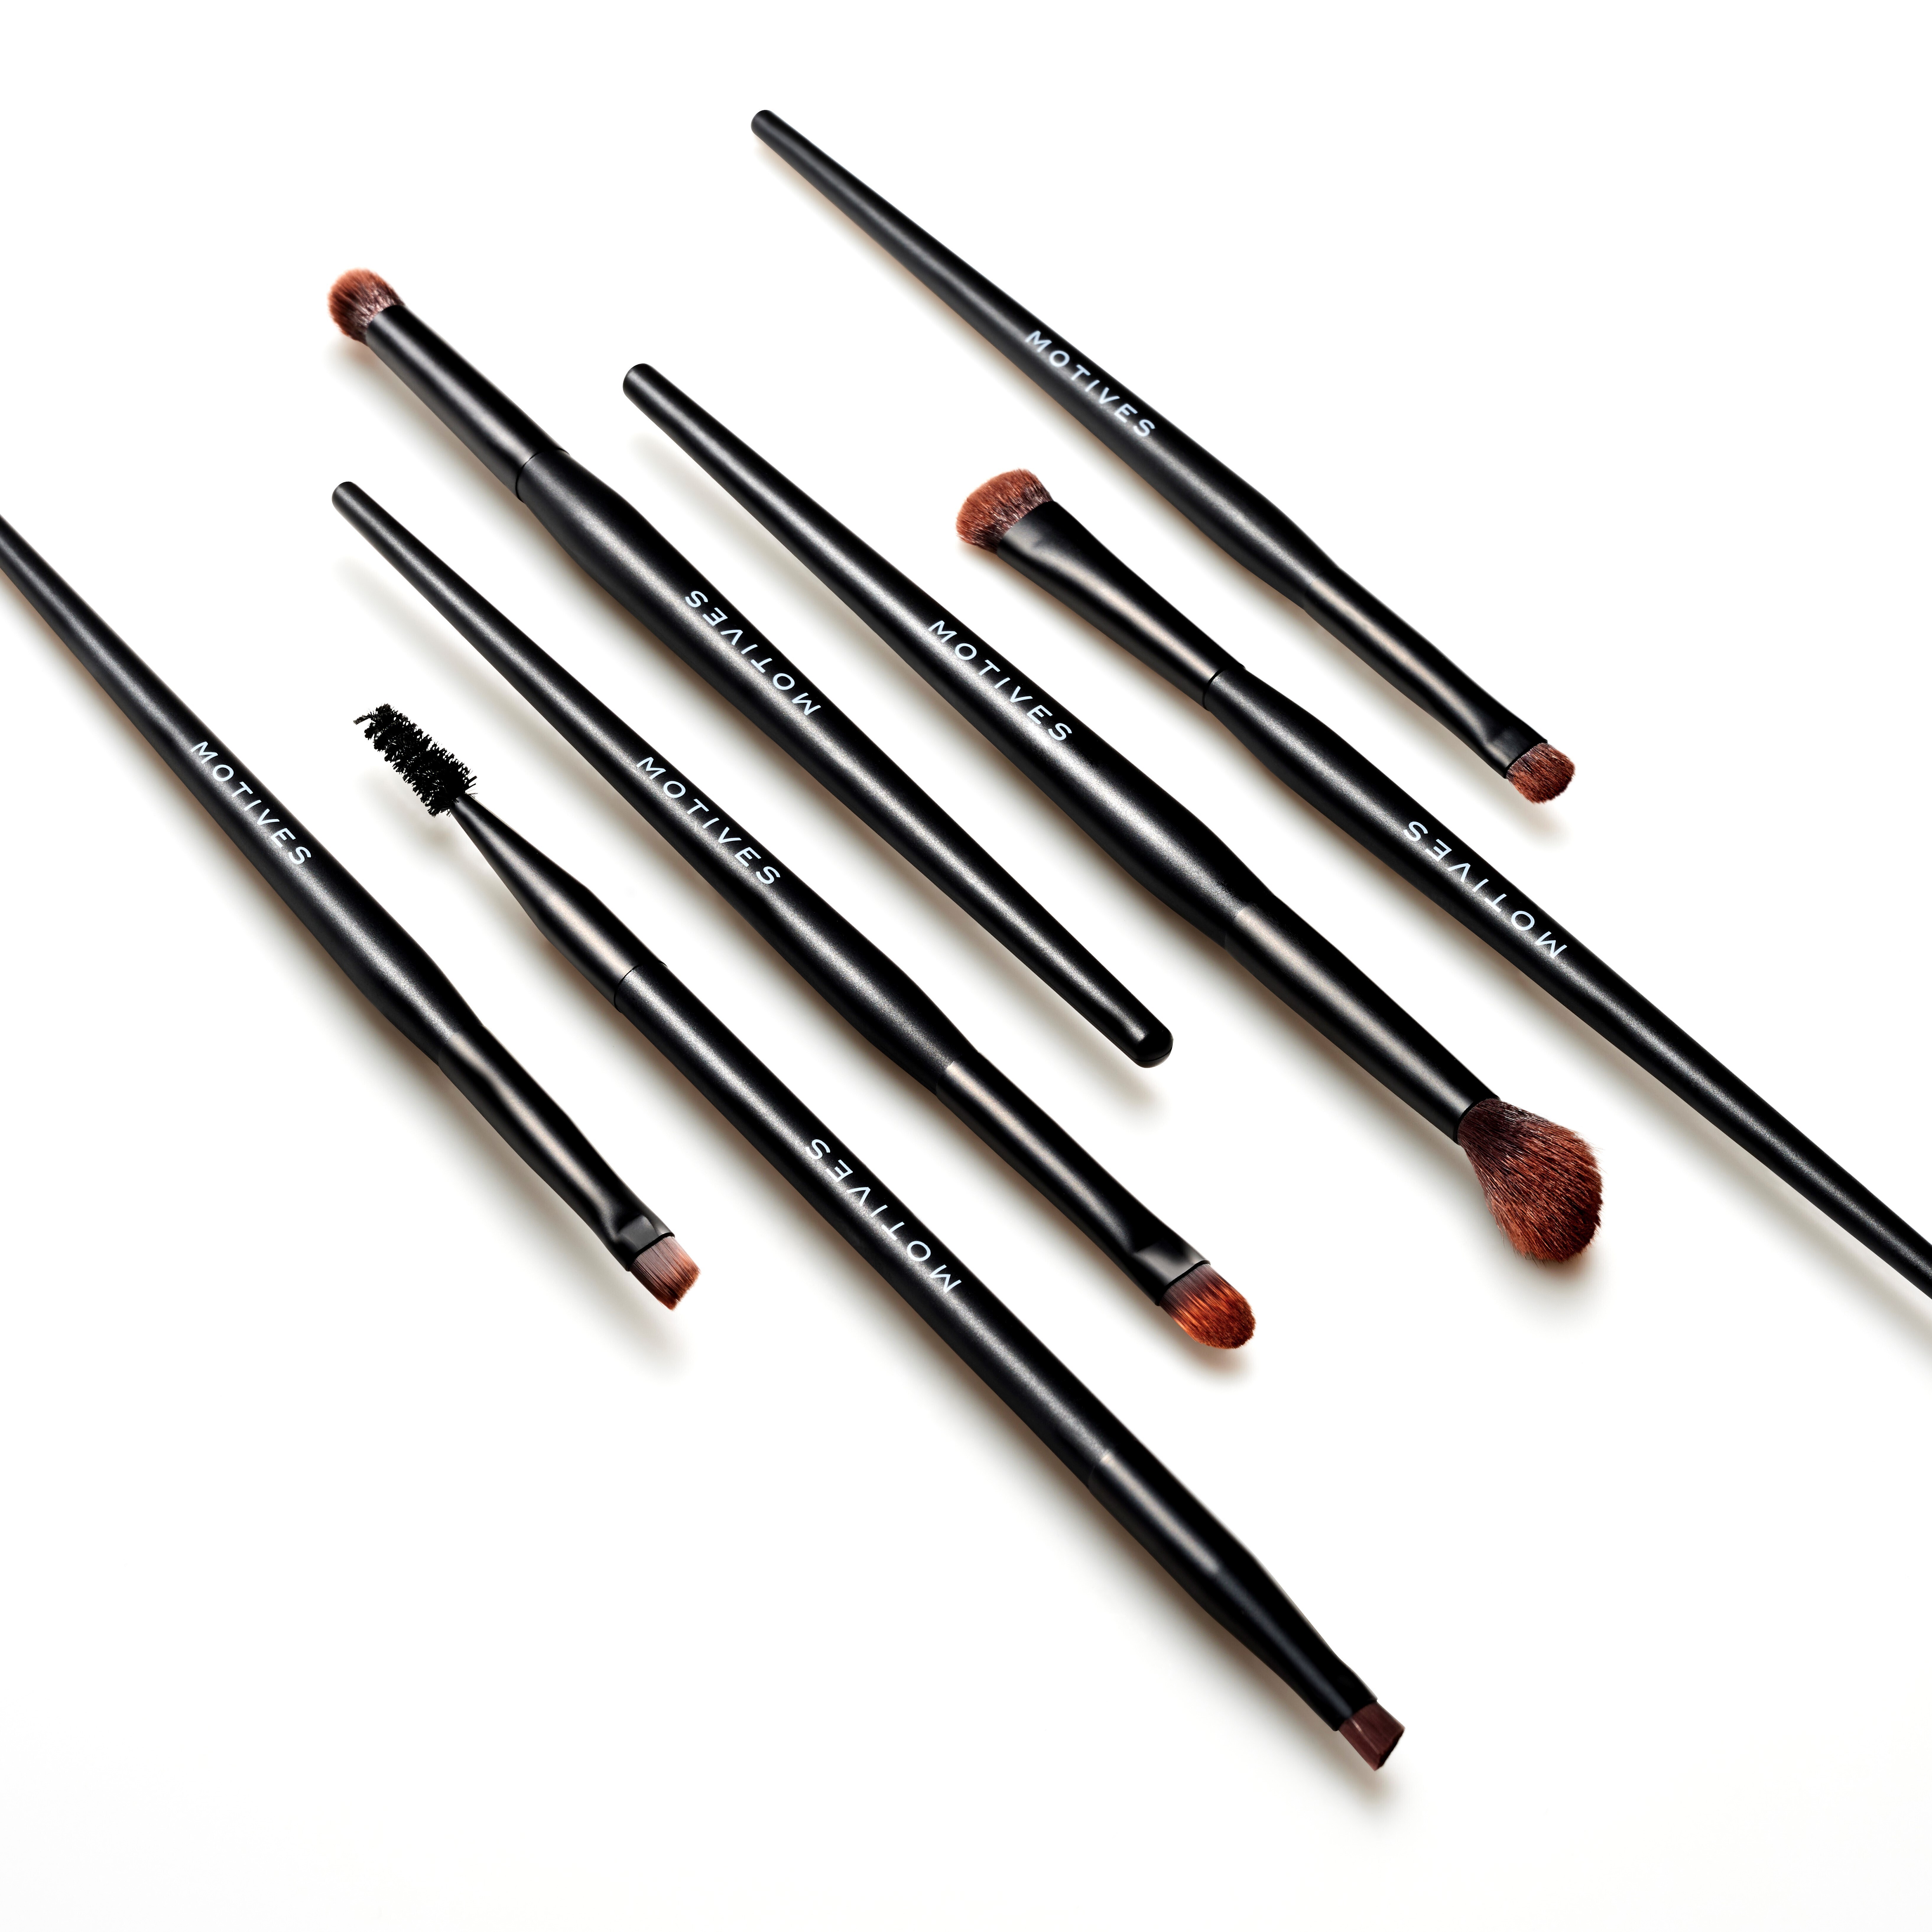 Motives Essential Eye 7-Piece Brush Set displayed at an angle on a white background.